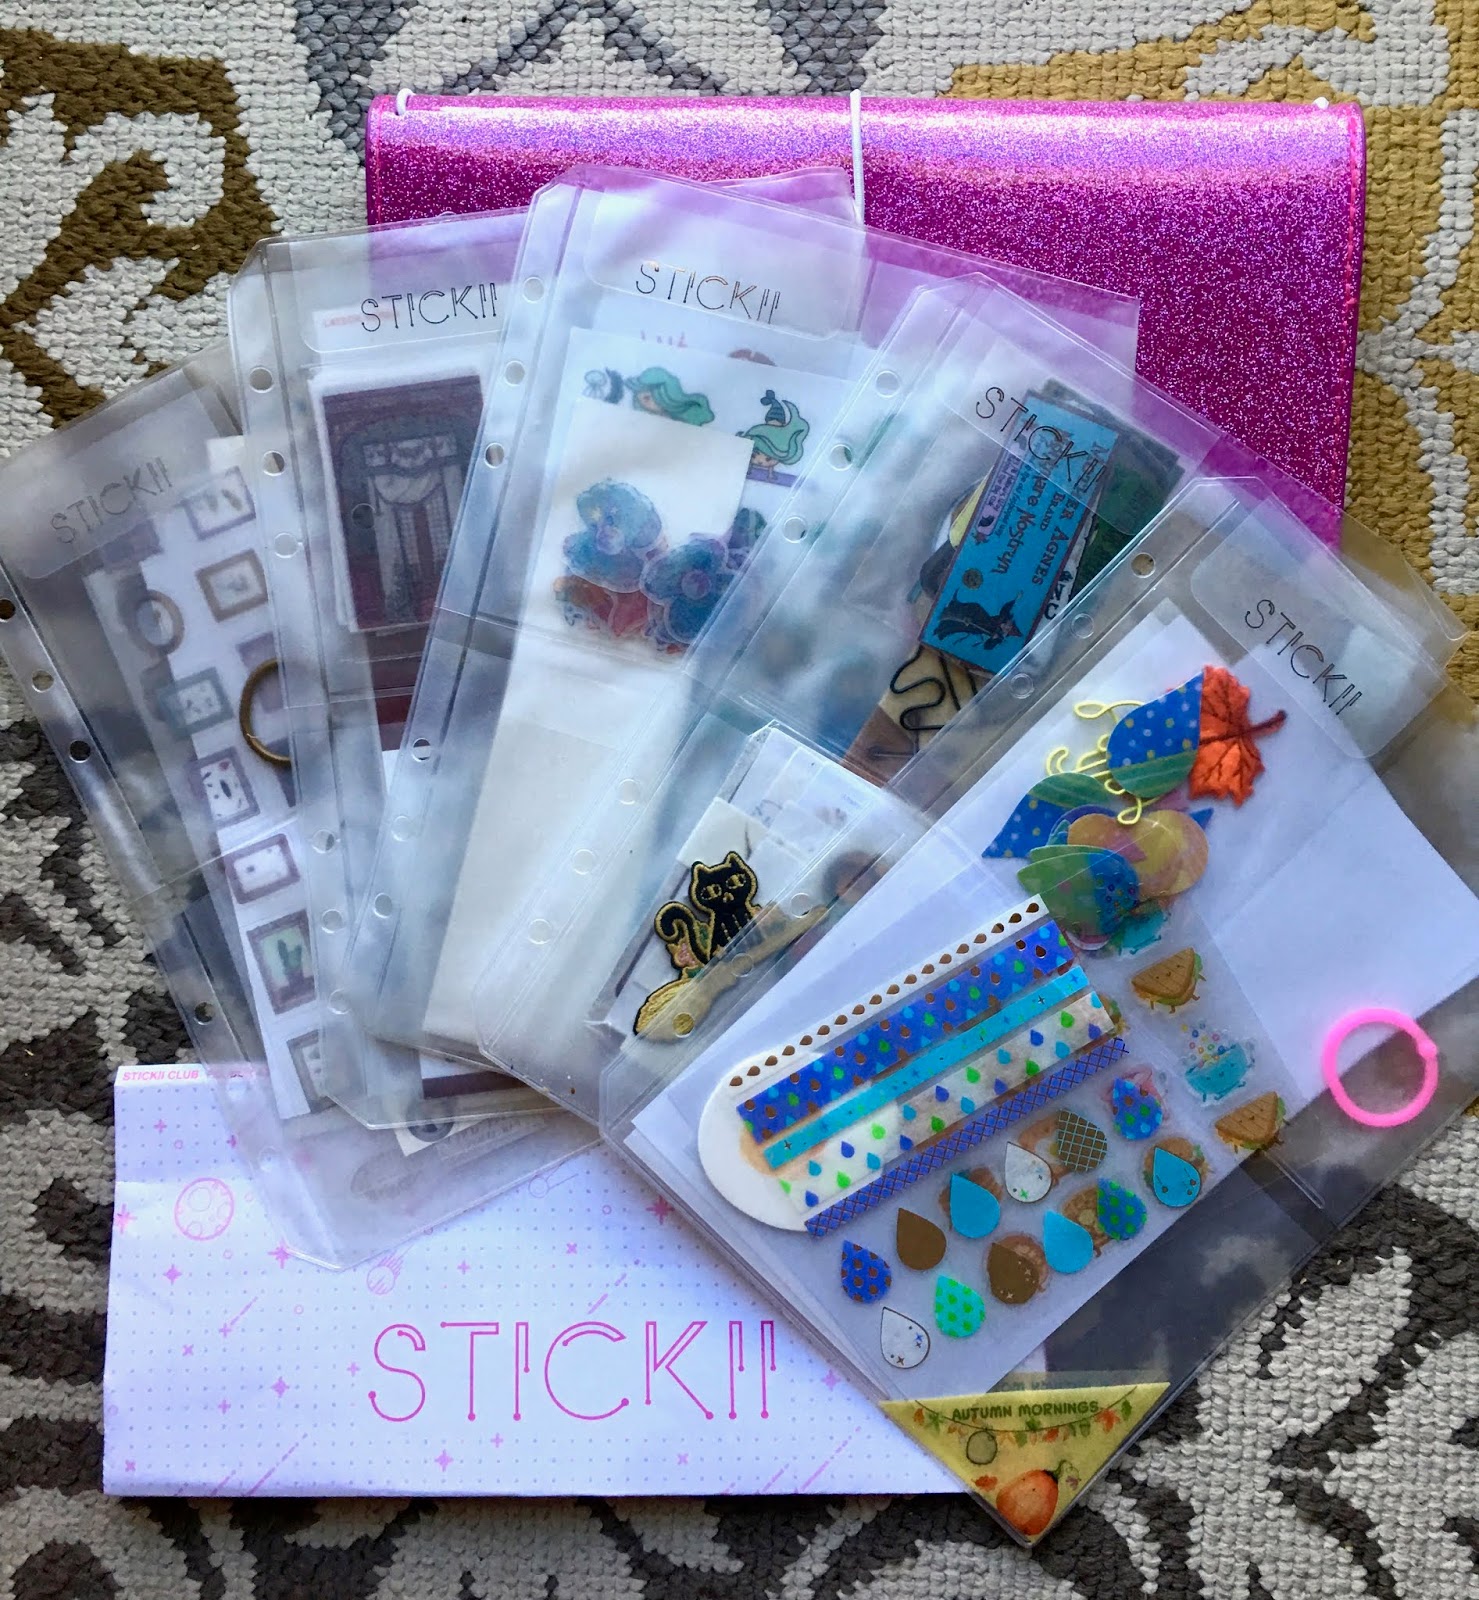 Stickii Club Monthly Sticker Club - Review | Keep Calm and Craft On Blog